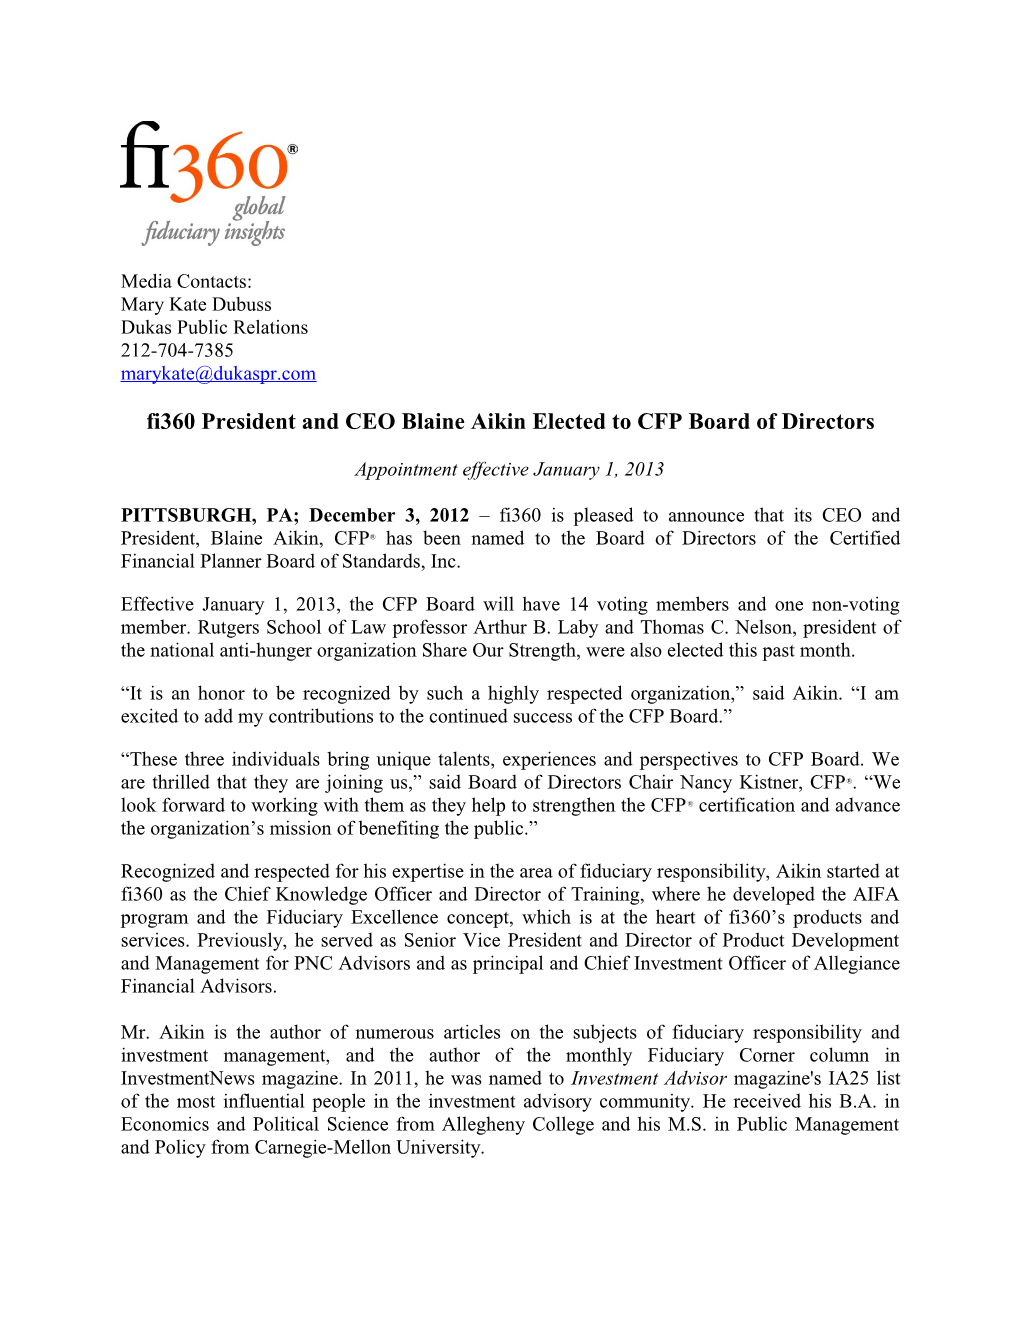 Fi360 President and CEO Blaine Aikin Elected to CFP Board of Directors